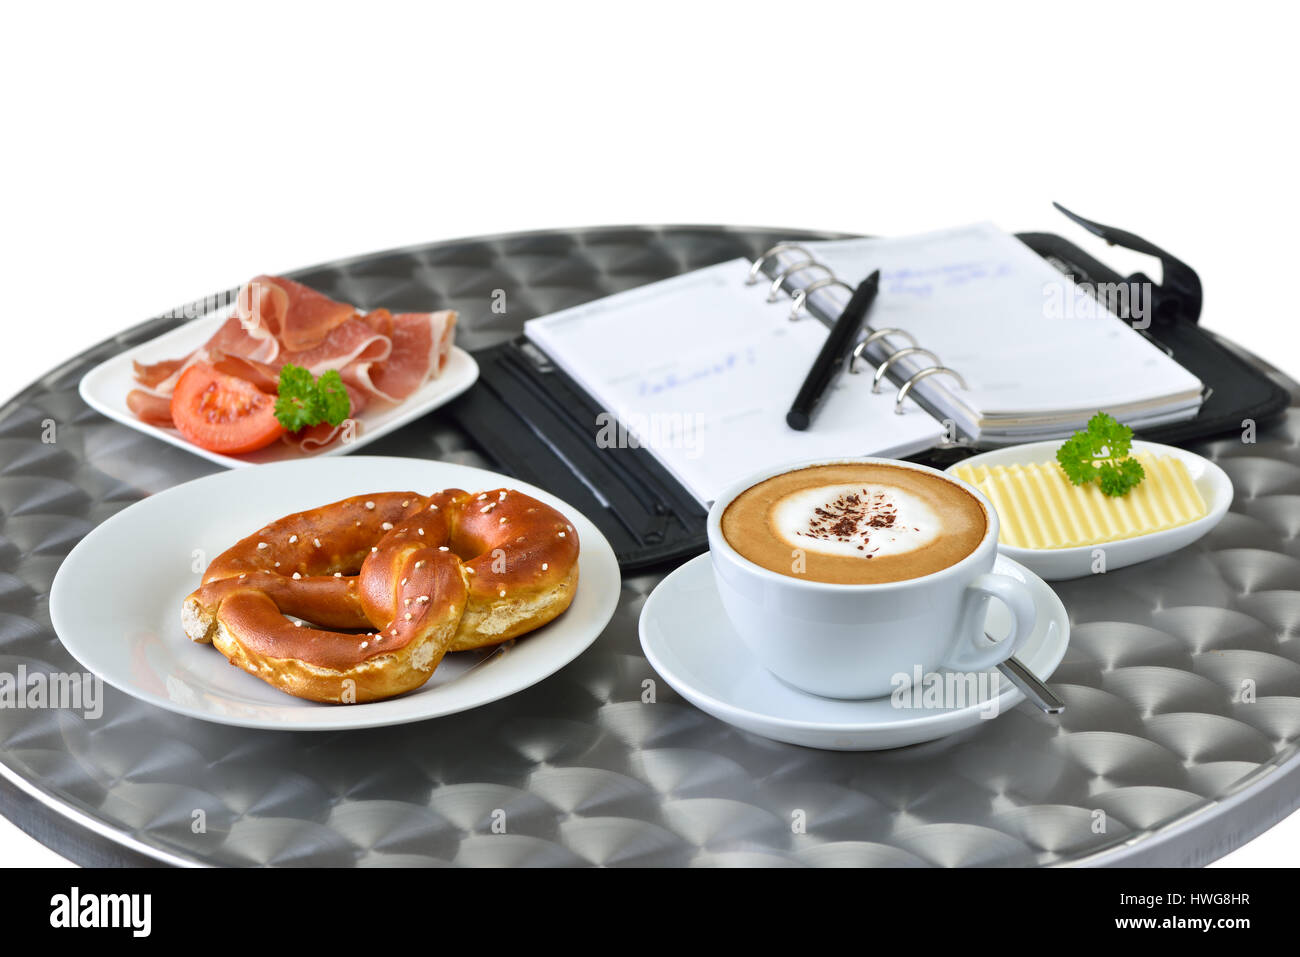 Business snack with a ham sandwich and a cup of cappuccino; a personal organizer in the background Stock Photo